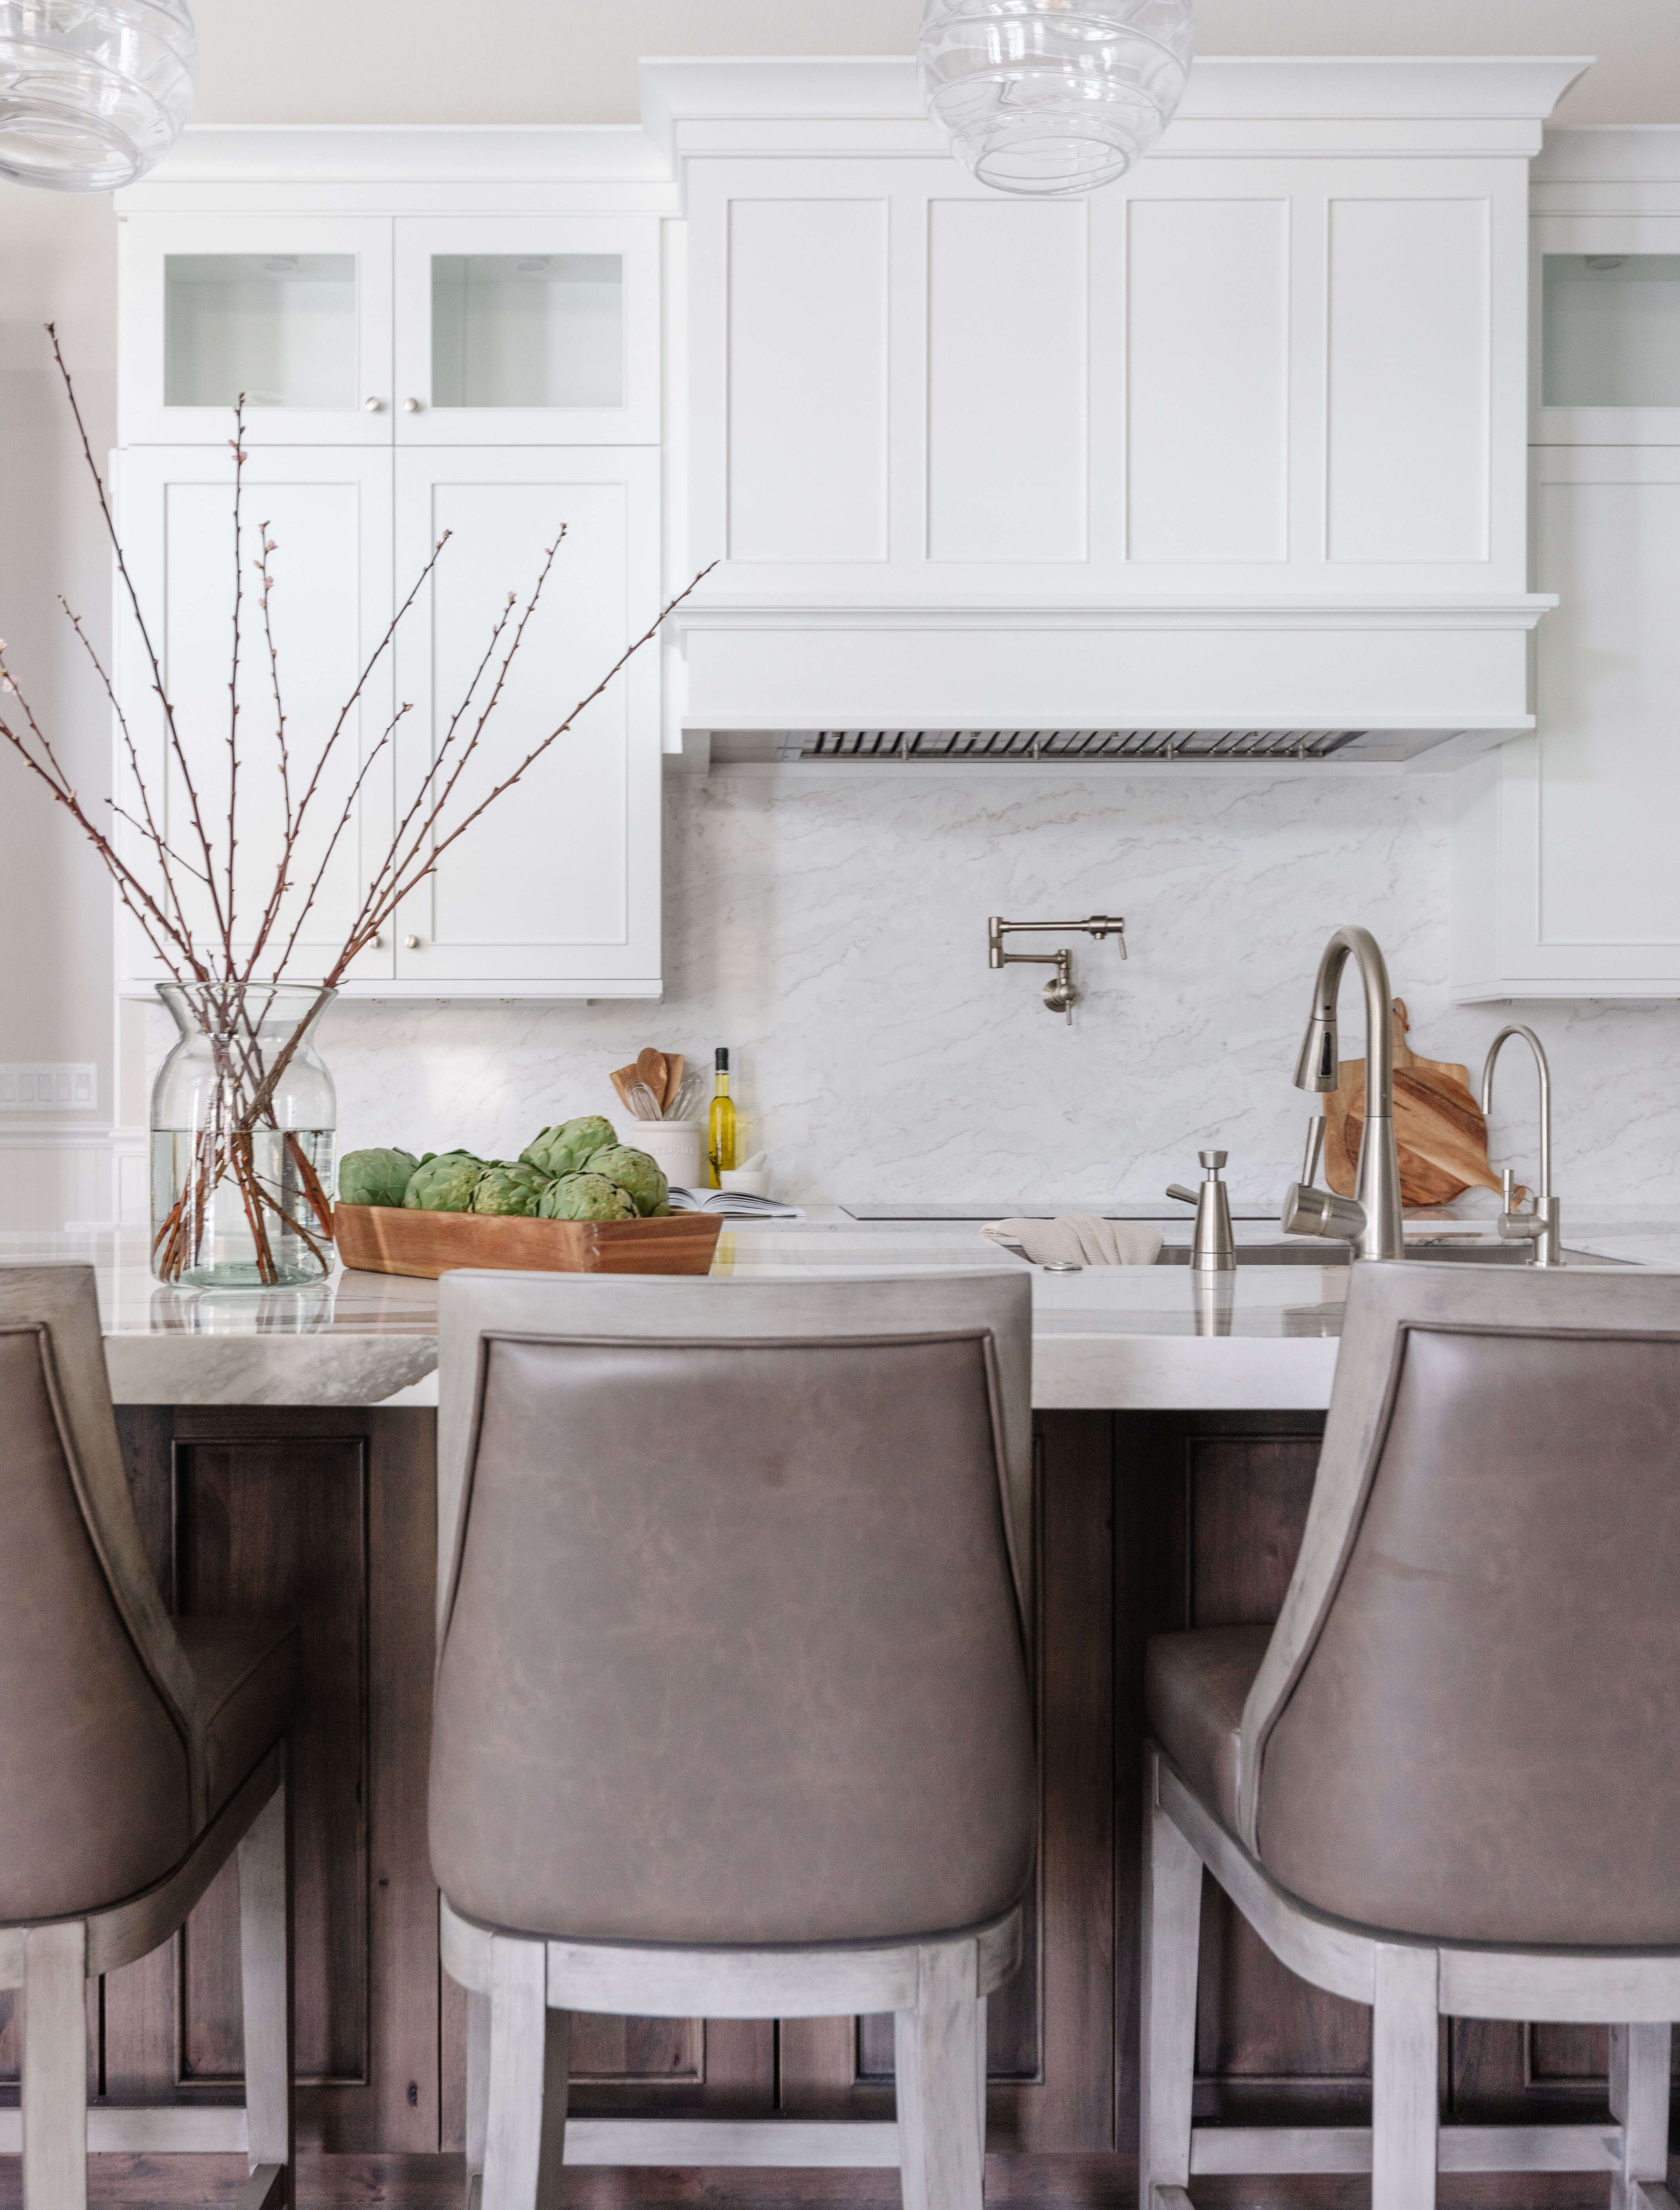 A transitional and casual kitchen design with elegant finishes. A grand white painted wood hood takes center stage over the knotty alder kitchen island.